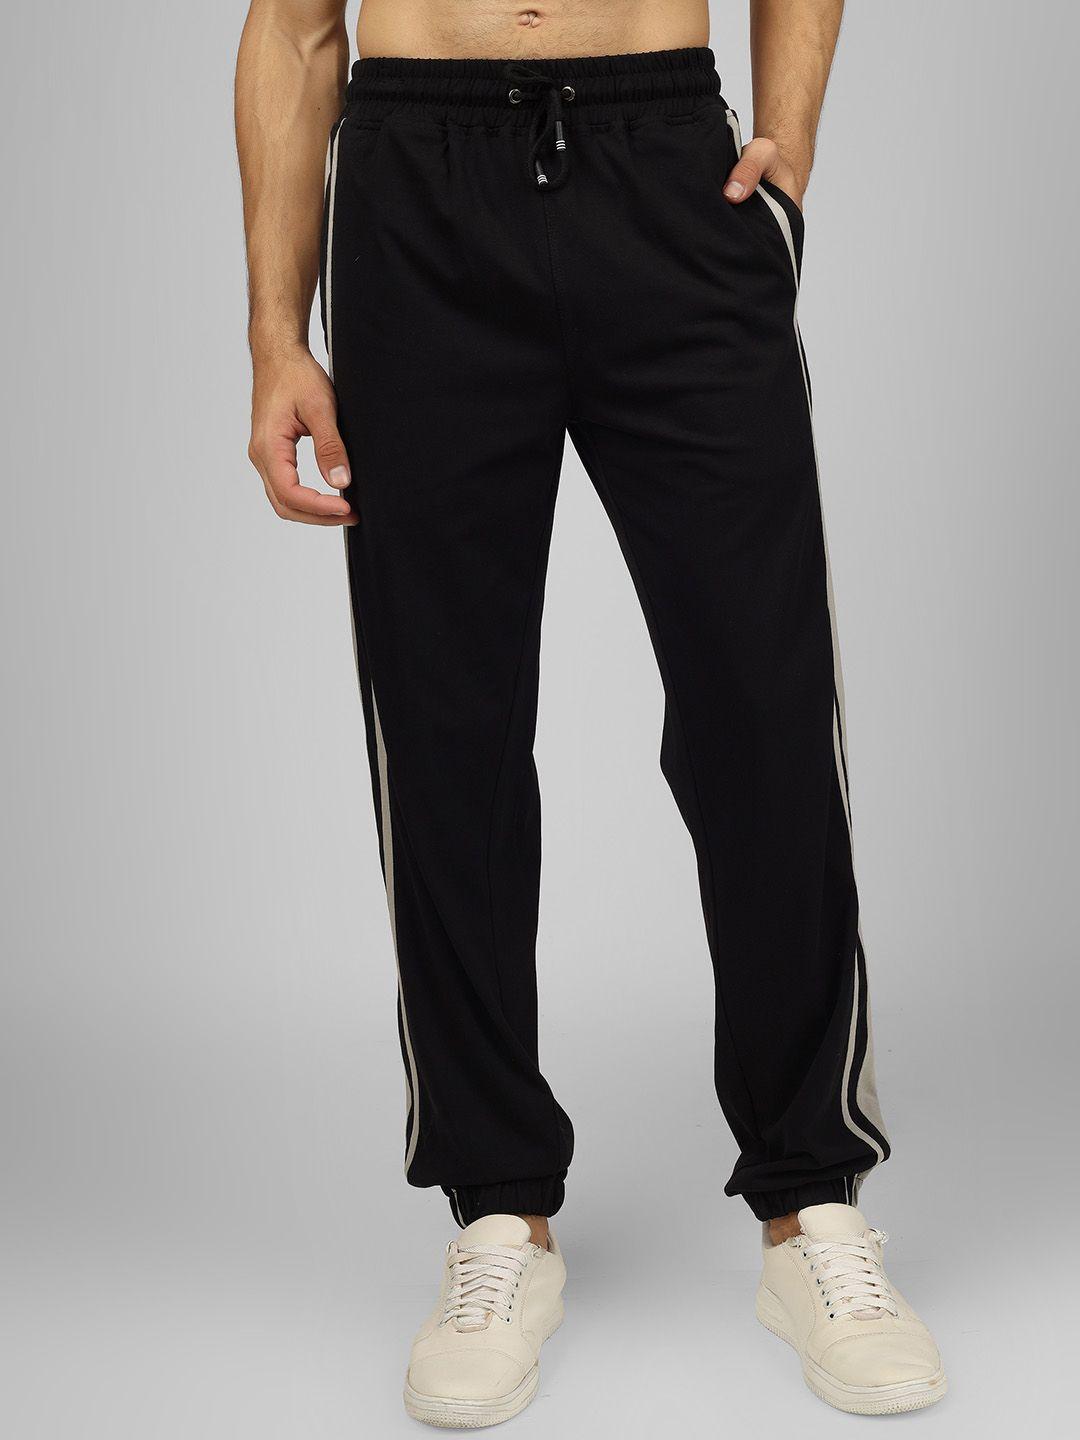 wearduds duds hd men mid-rise relaxed-fit joggers